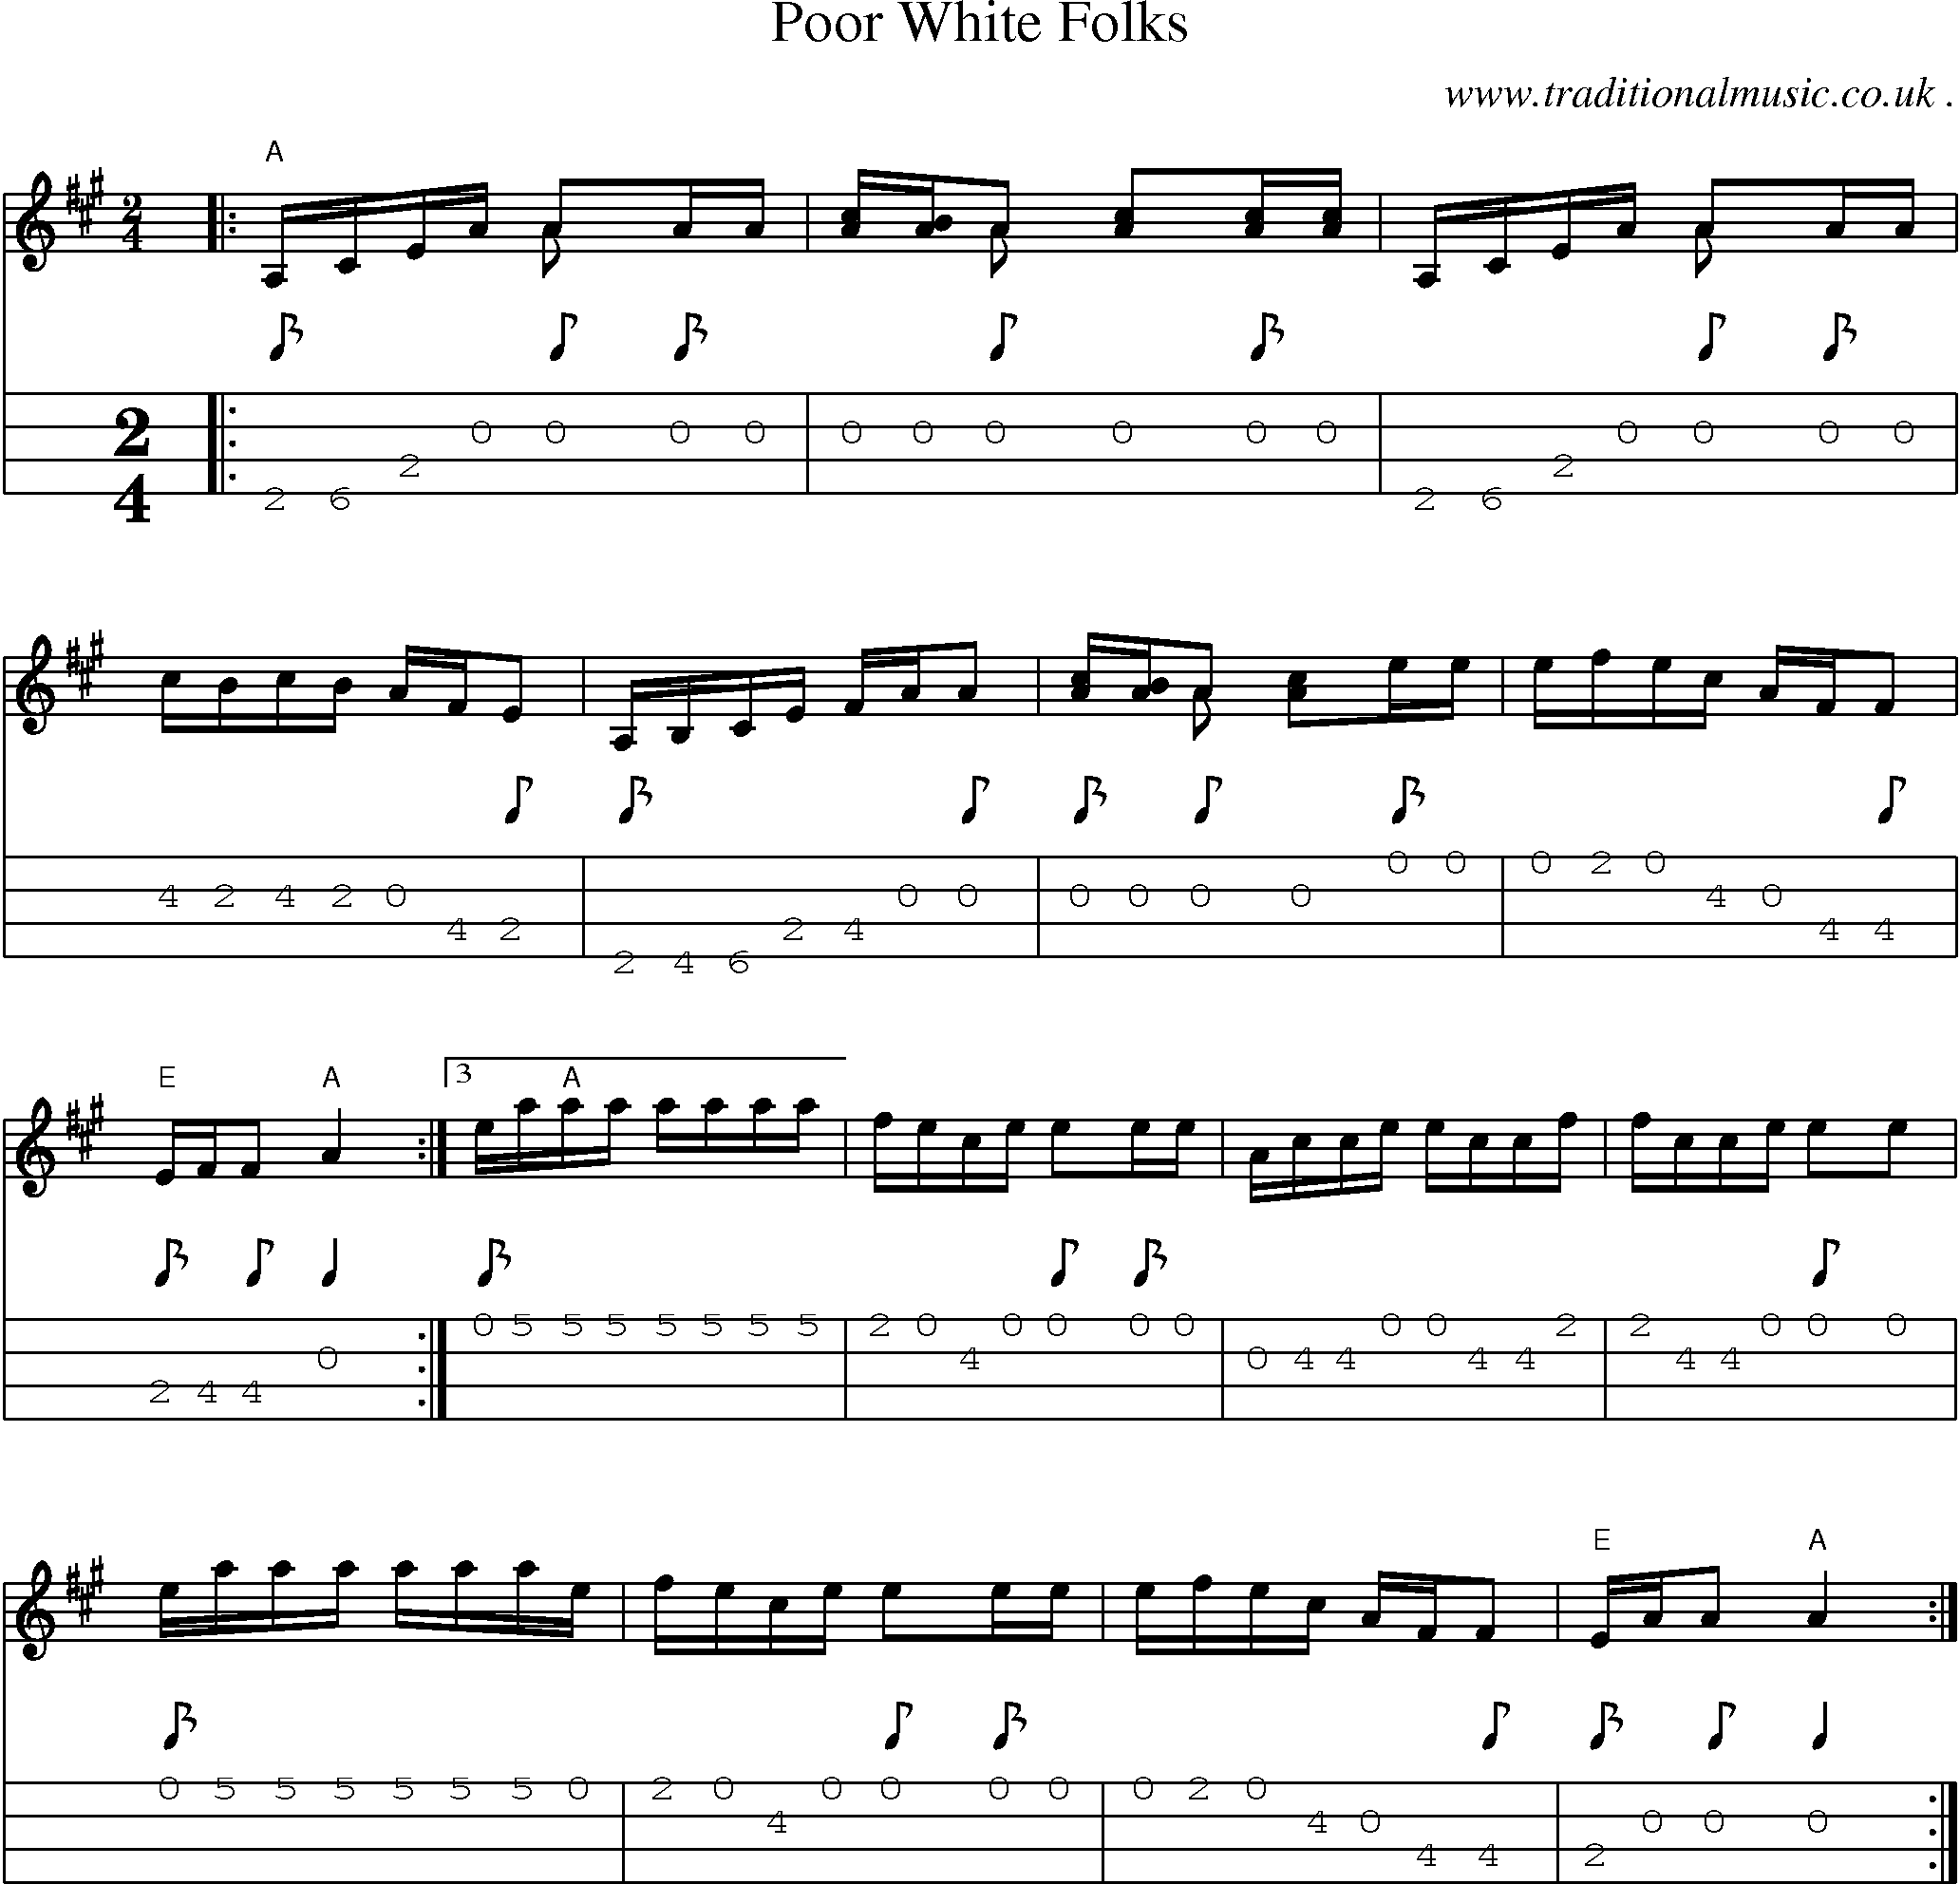 Music Score and Guitar Tabs for Poor White Folks